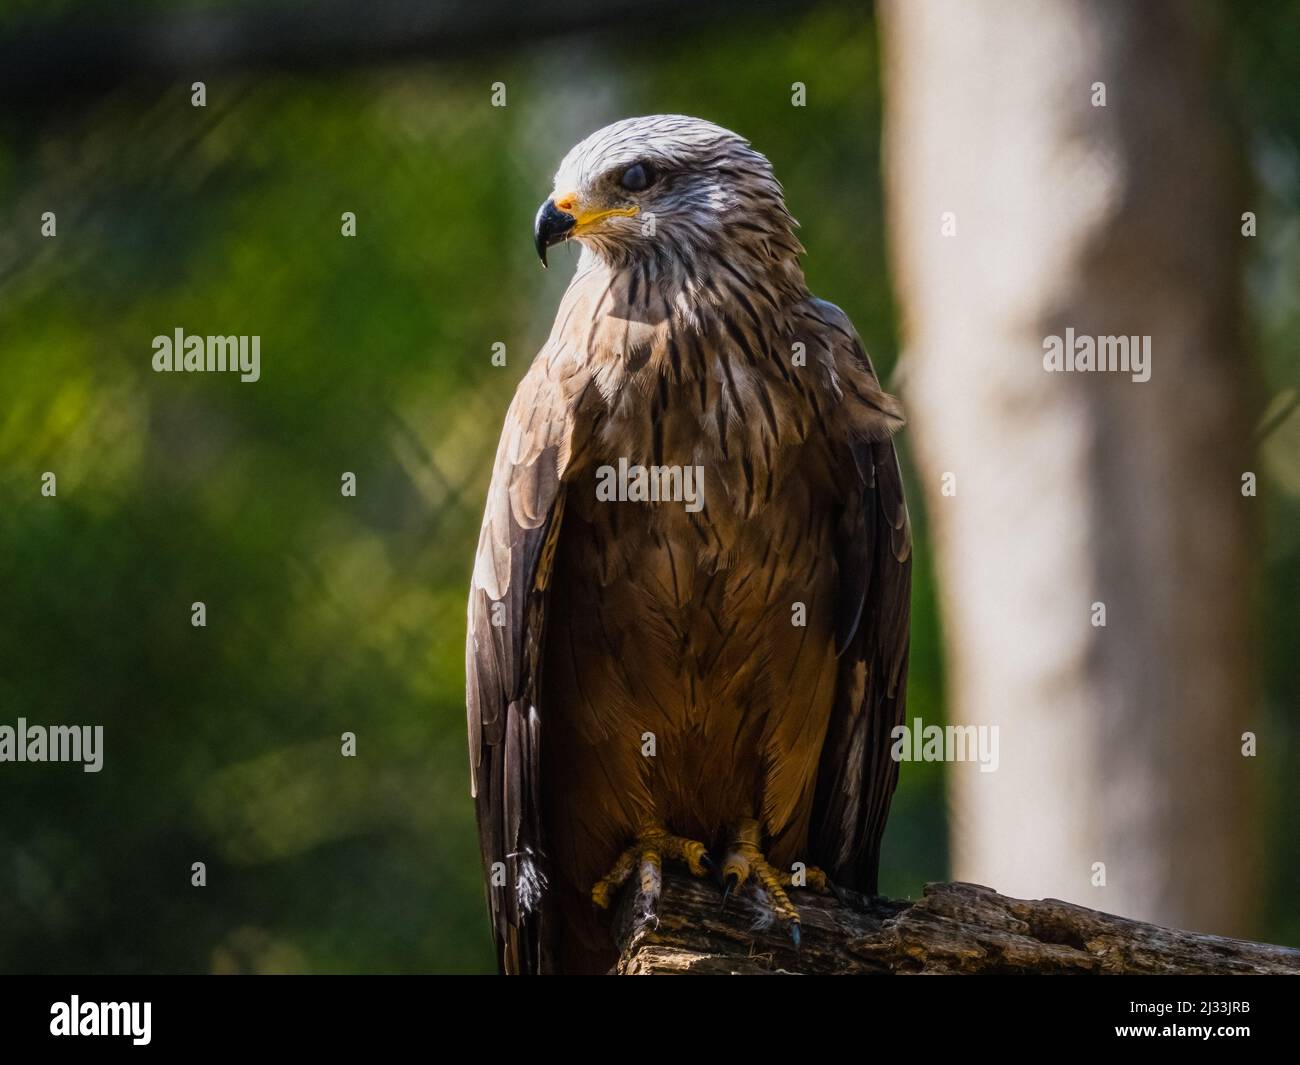 Falcon perched on a tree trunk Stock Photo